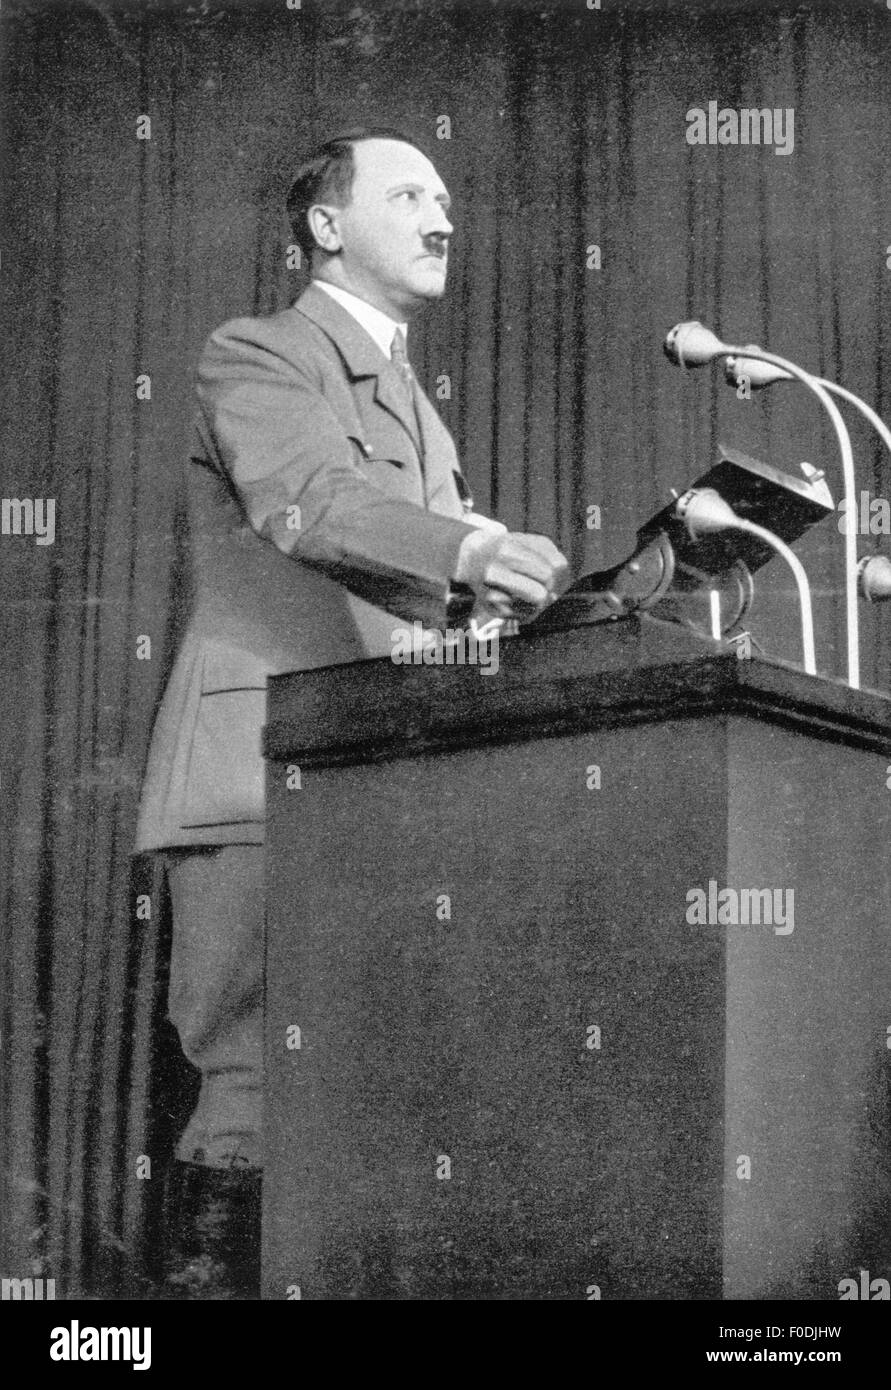 Hitler, Adolf, 20.4.1889 - 30.4.1945, German politician (NSDAP), Chancellor of the Reich 30.1.1933 - 30.4.1945, address during the election campaign, March 1936, Stock Photo